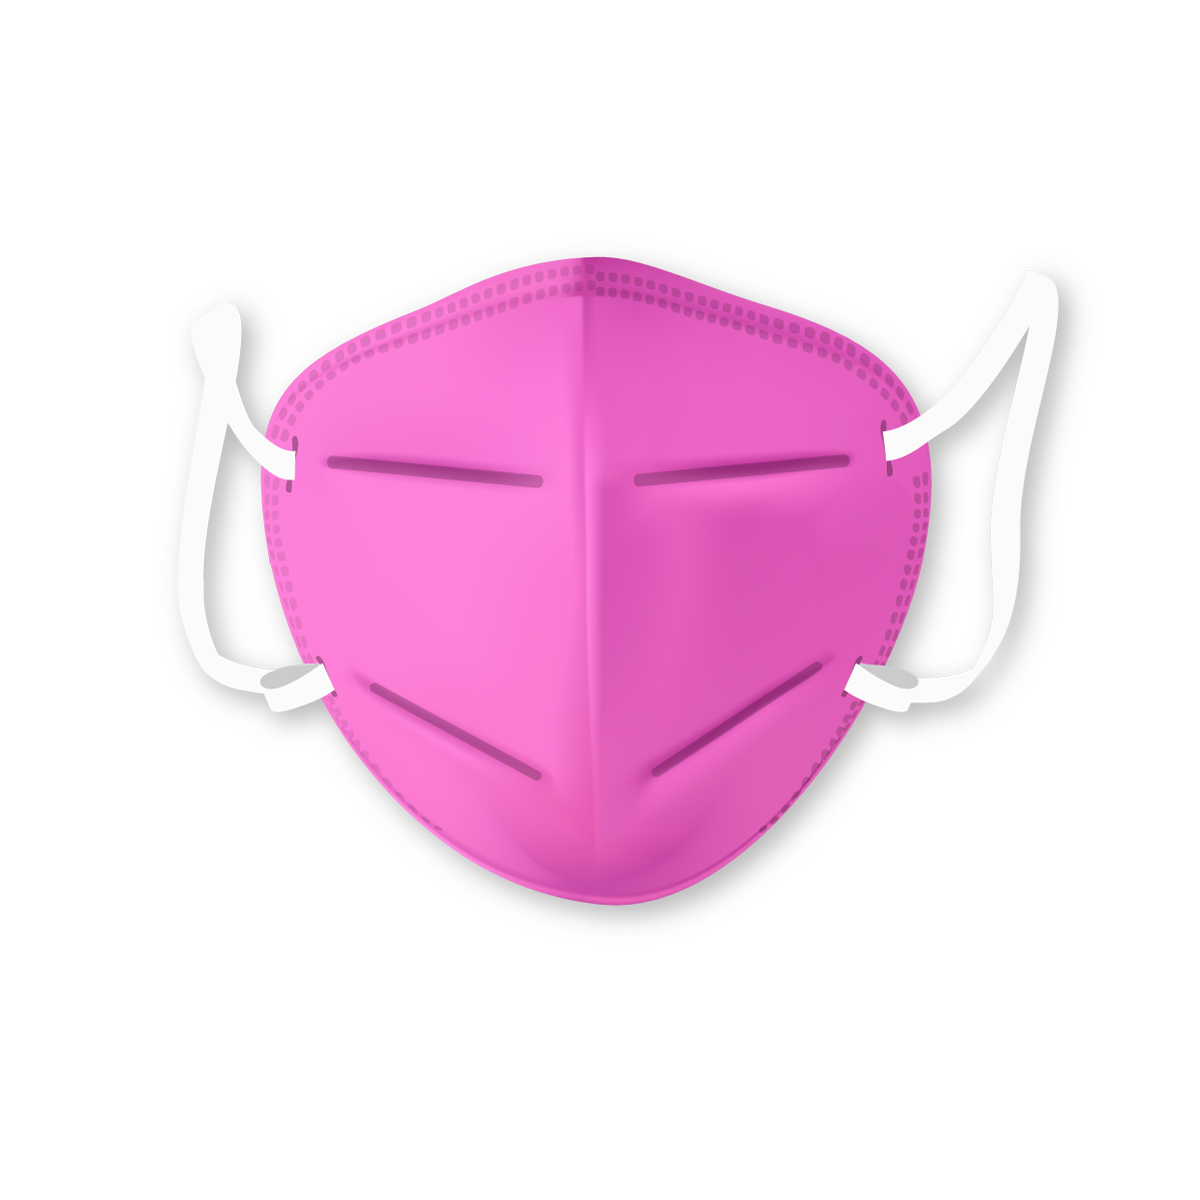 5Layers Mask with Meltblown,HAC,Nose Pin (Pack of 30 Masks in Pink Color)